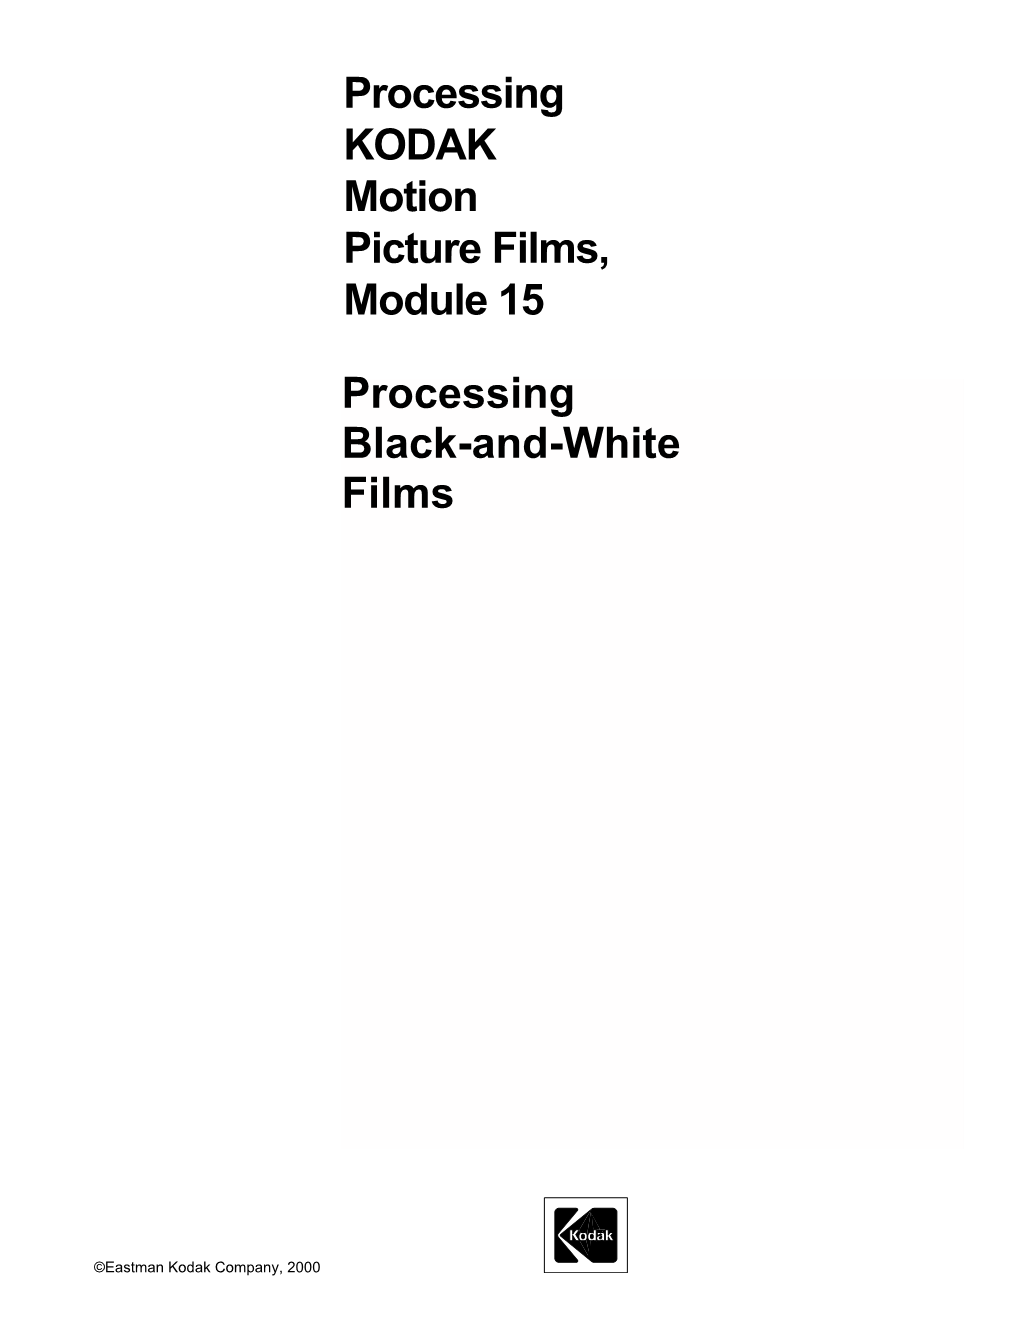 Module 15: Processing Black-And-White Films